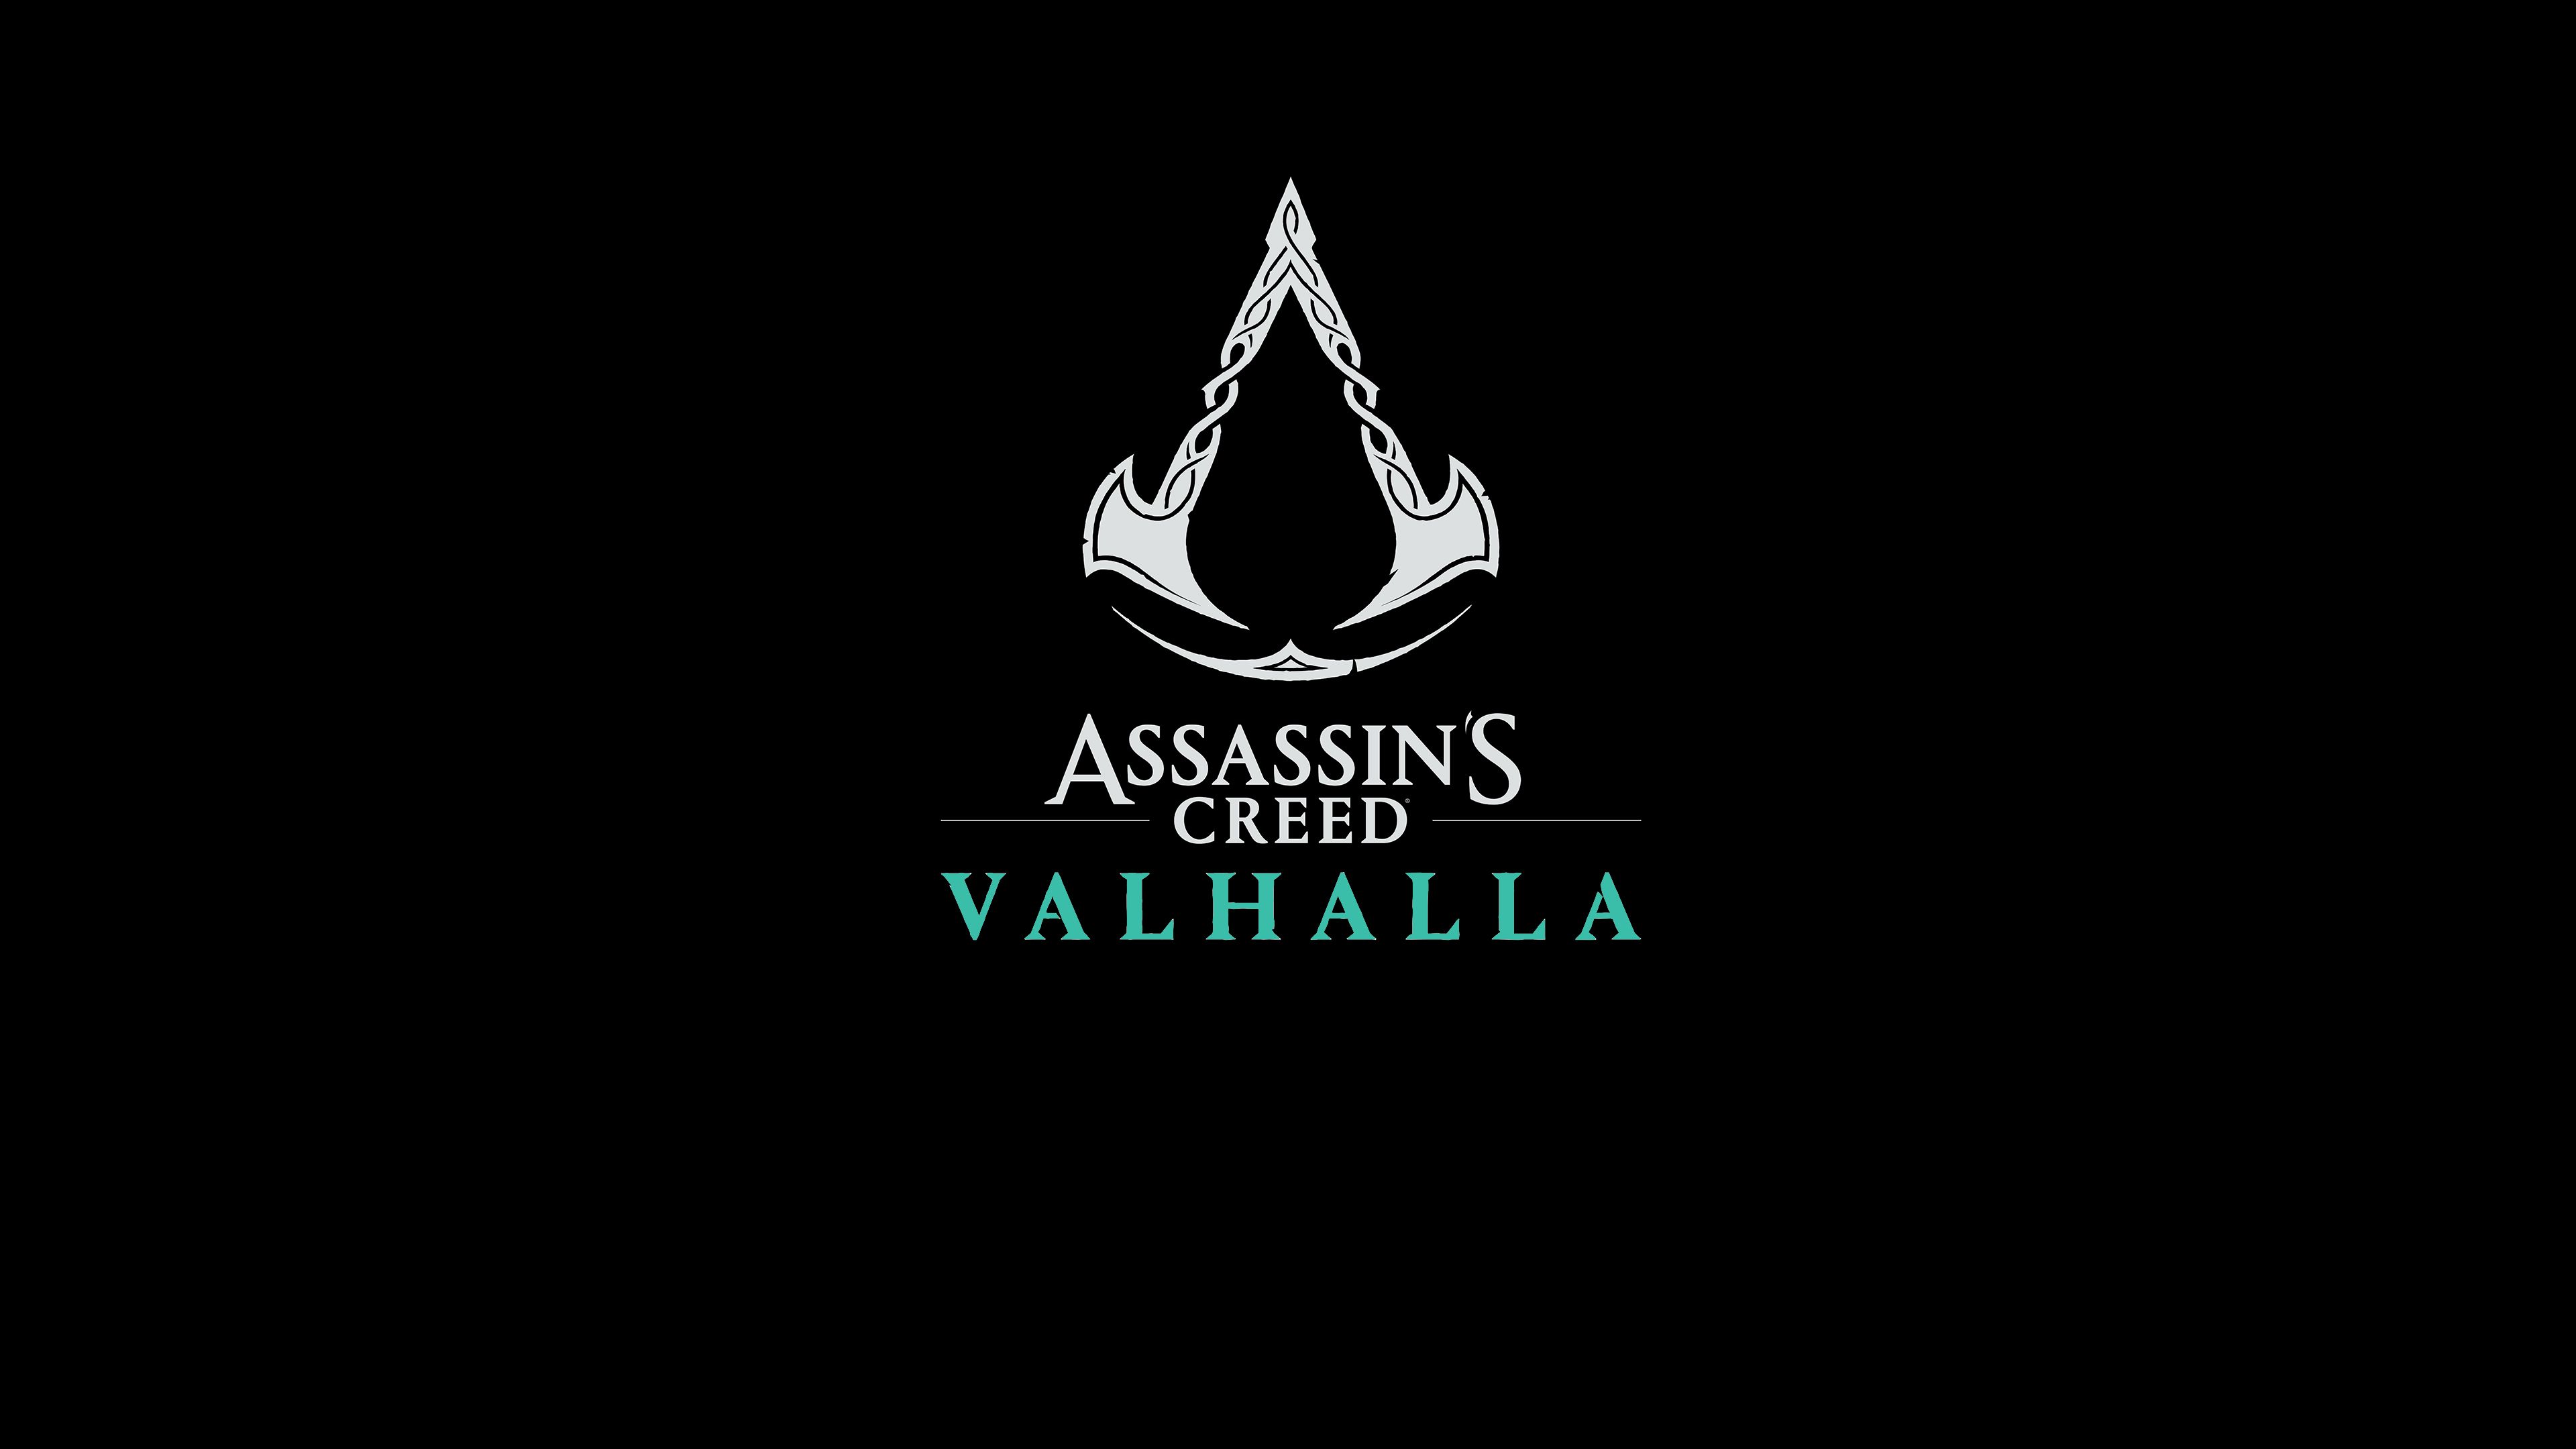 Assassin's Creed Valhalla 4K Game Wallpaper, HD Games 4K Wallpaper, Image, Photo and Background